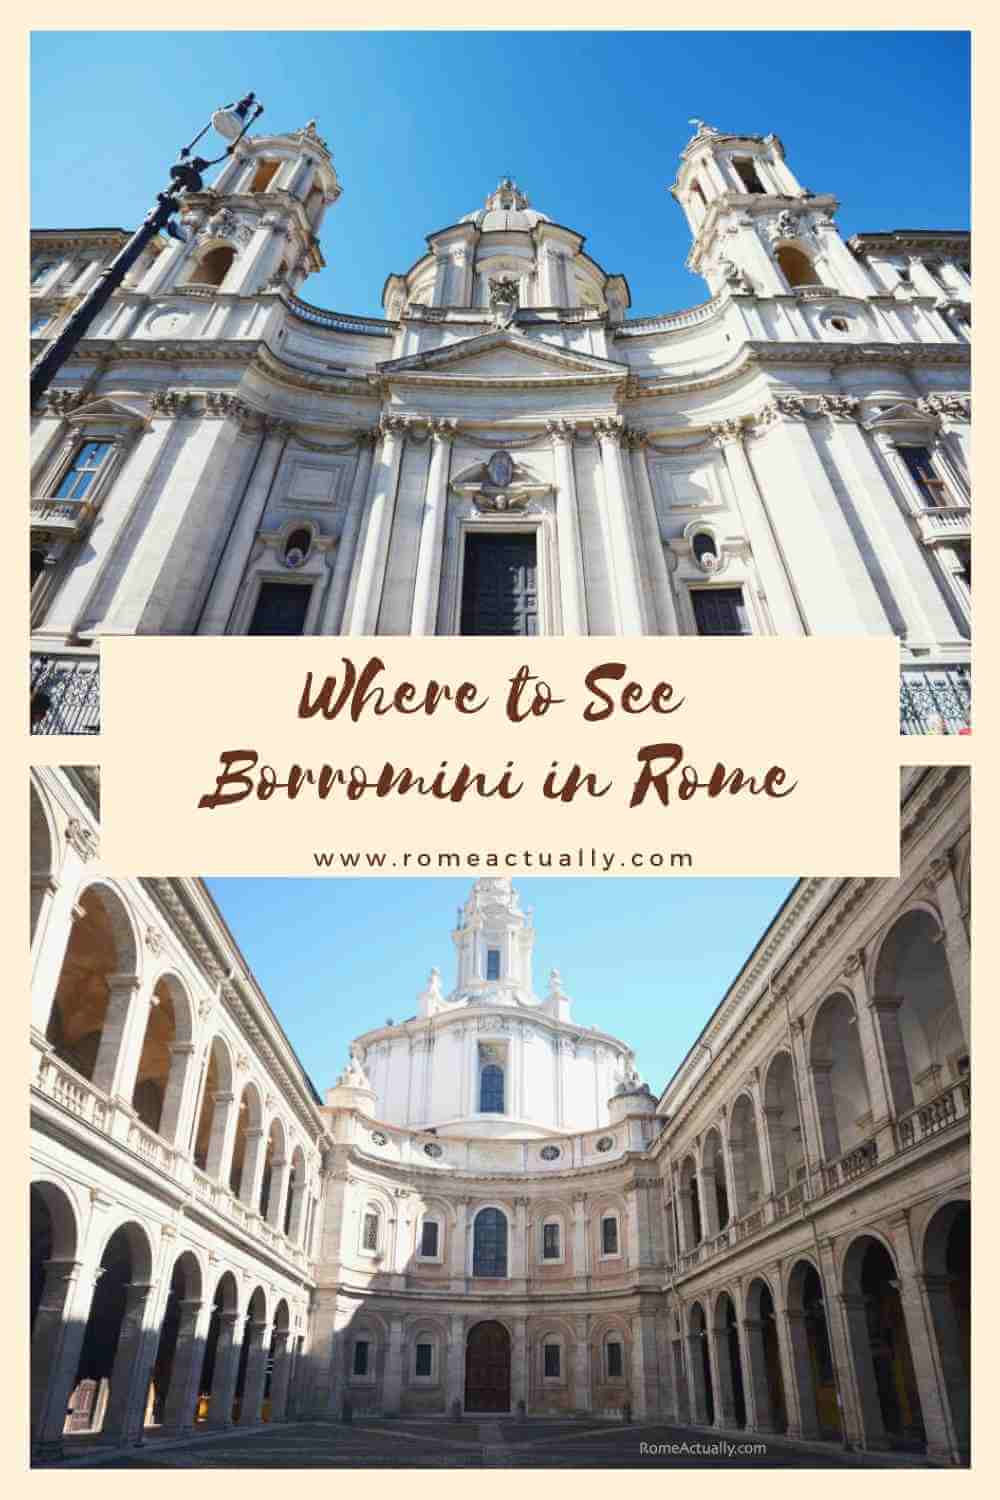 Pinterest image with two photos of churches by Borromini and a caption reading "Where to see Borromini in Rome"